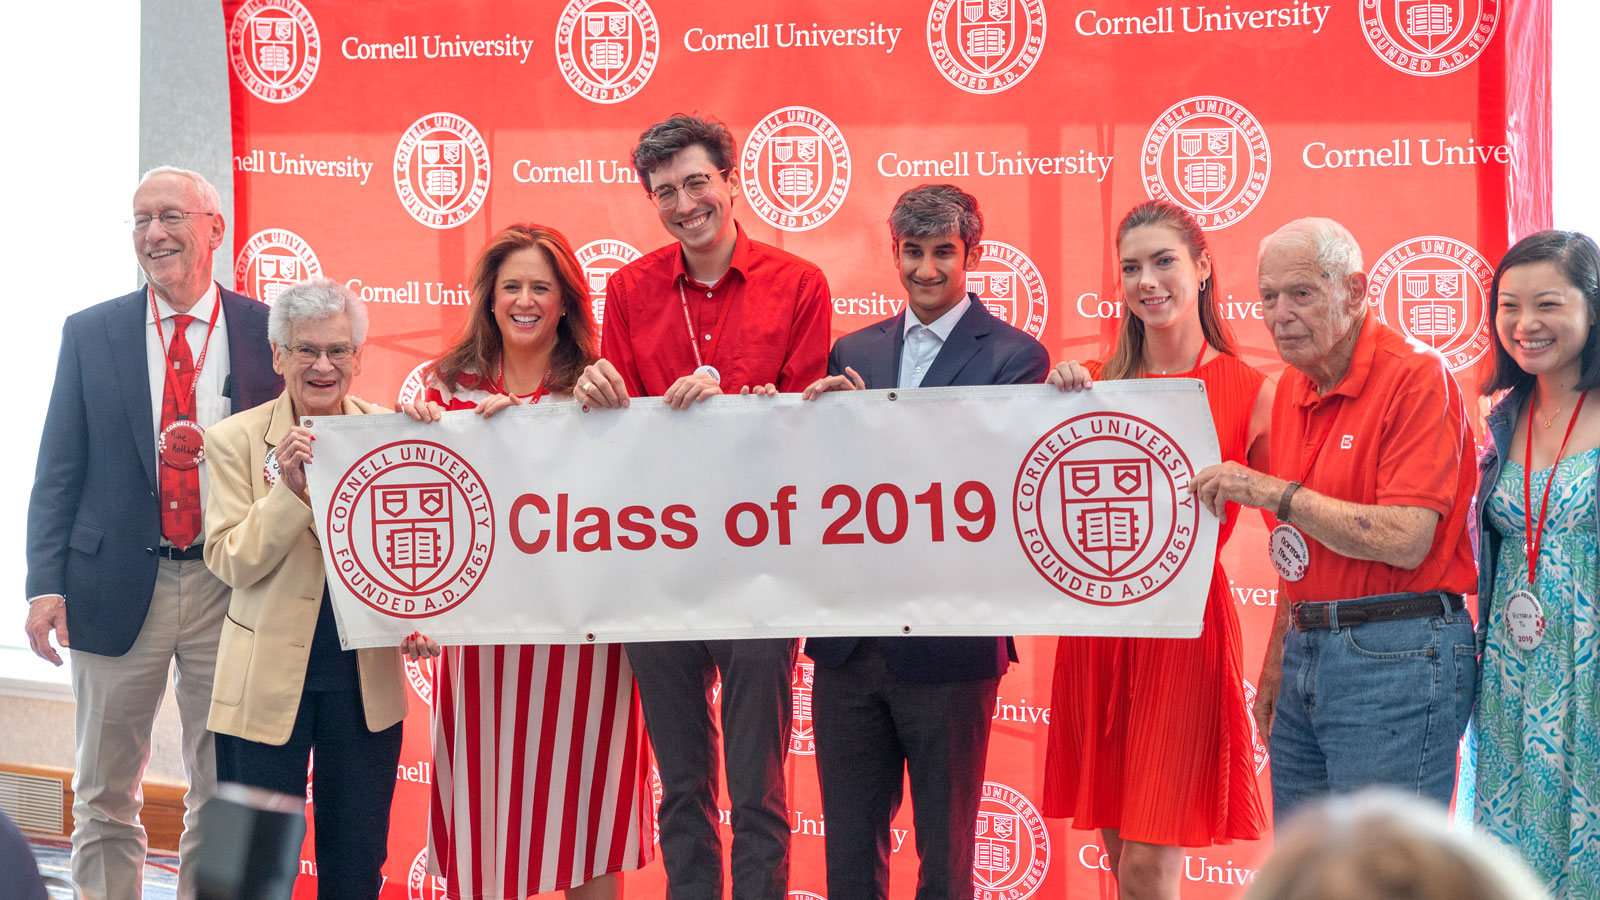 Marty Coler Risch, Class of 1949, passes the traditional banner to the youngest reunion class of 2019 during the "Spirit of '31" event during Reunion 2024